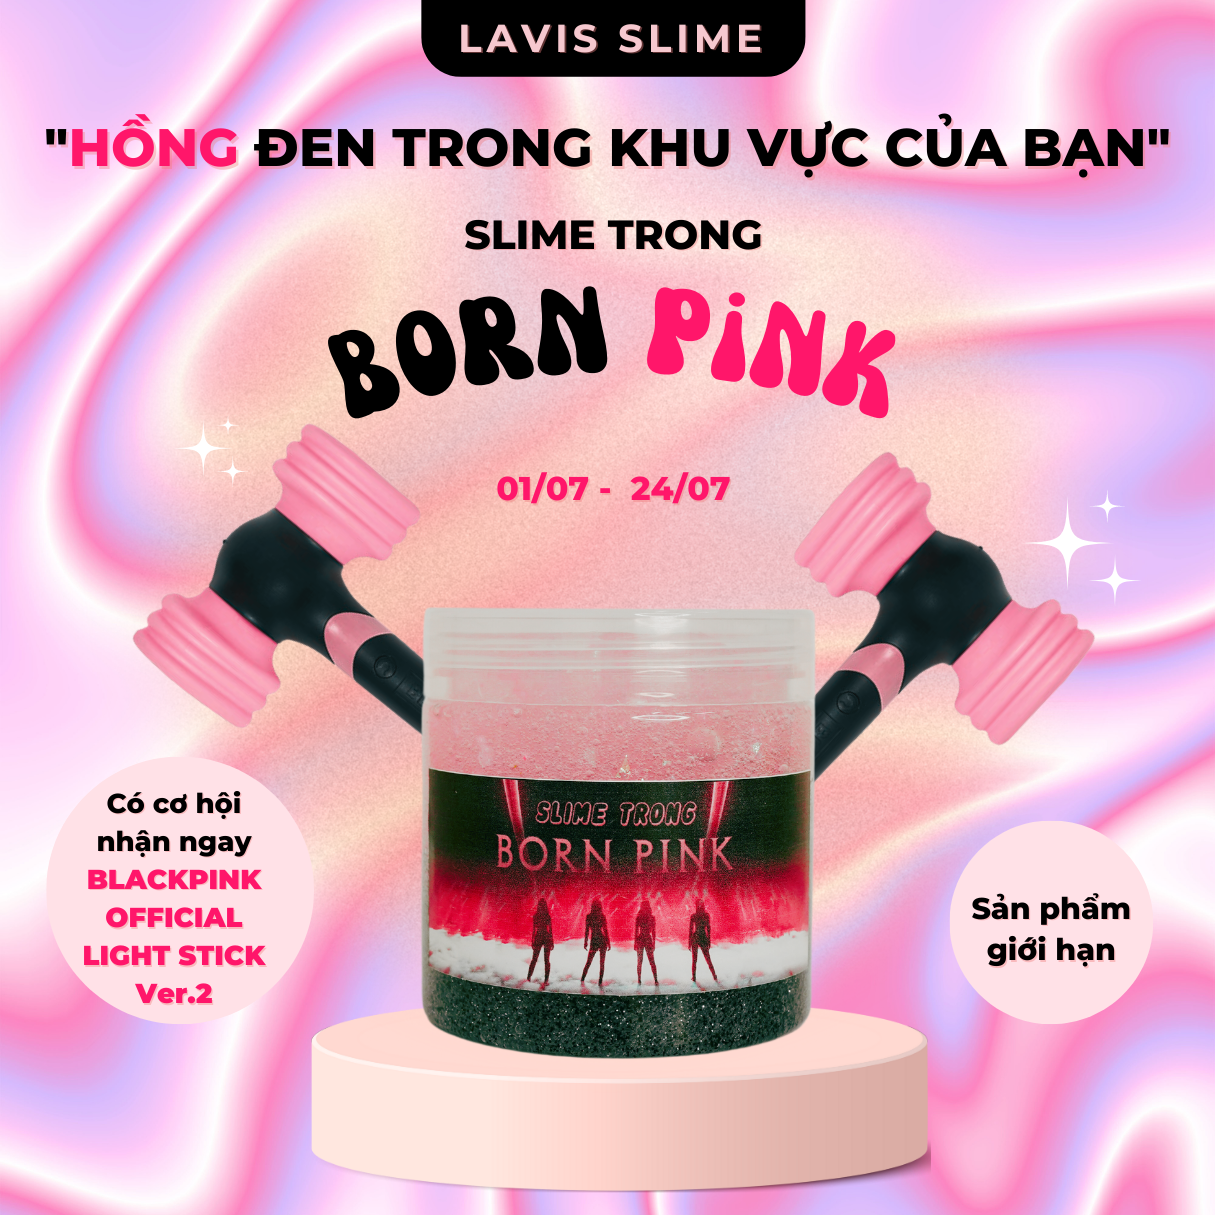 New Event - Slime Trong &quot; Born Pink &quot; - Sản phẩm giới hạn